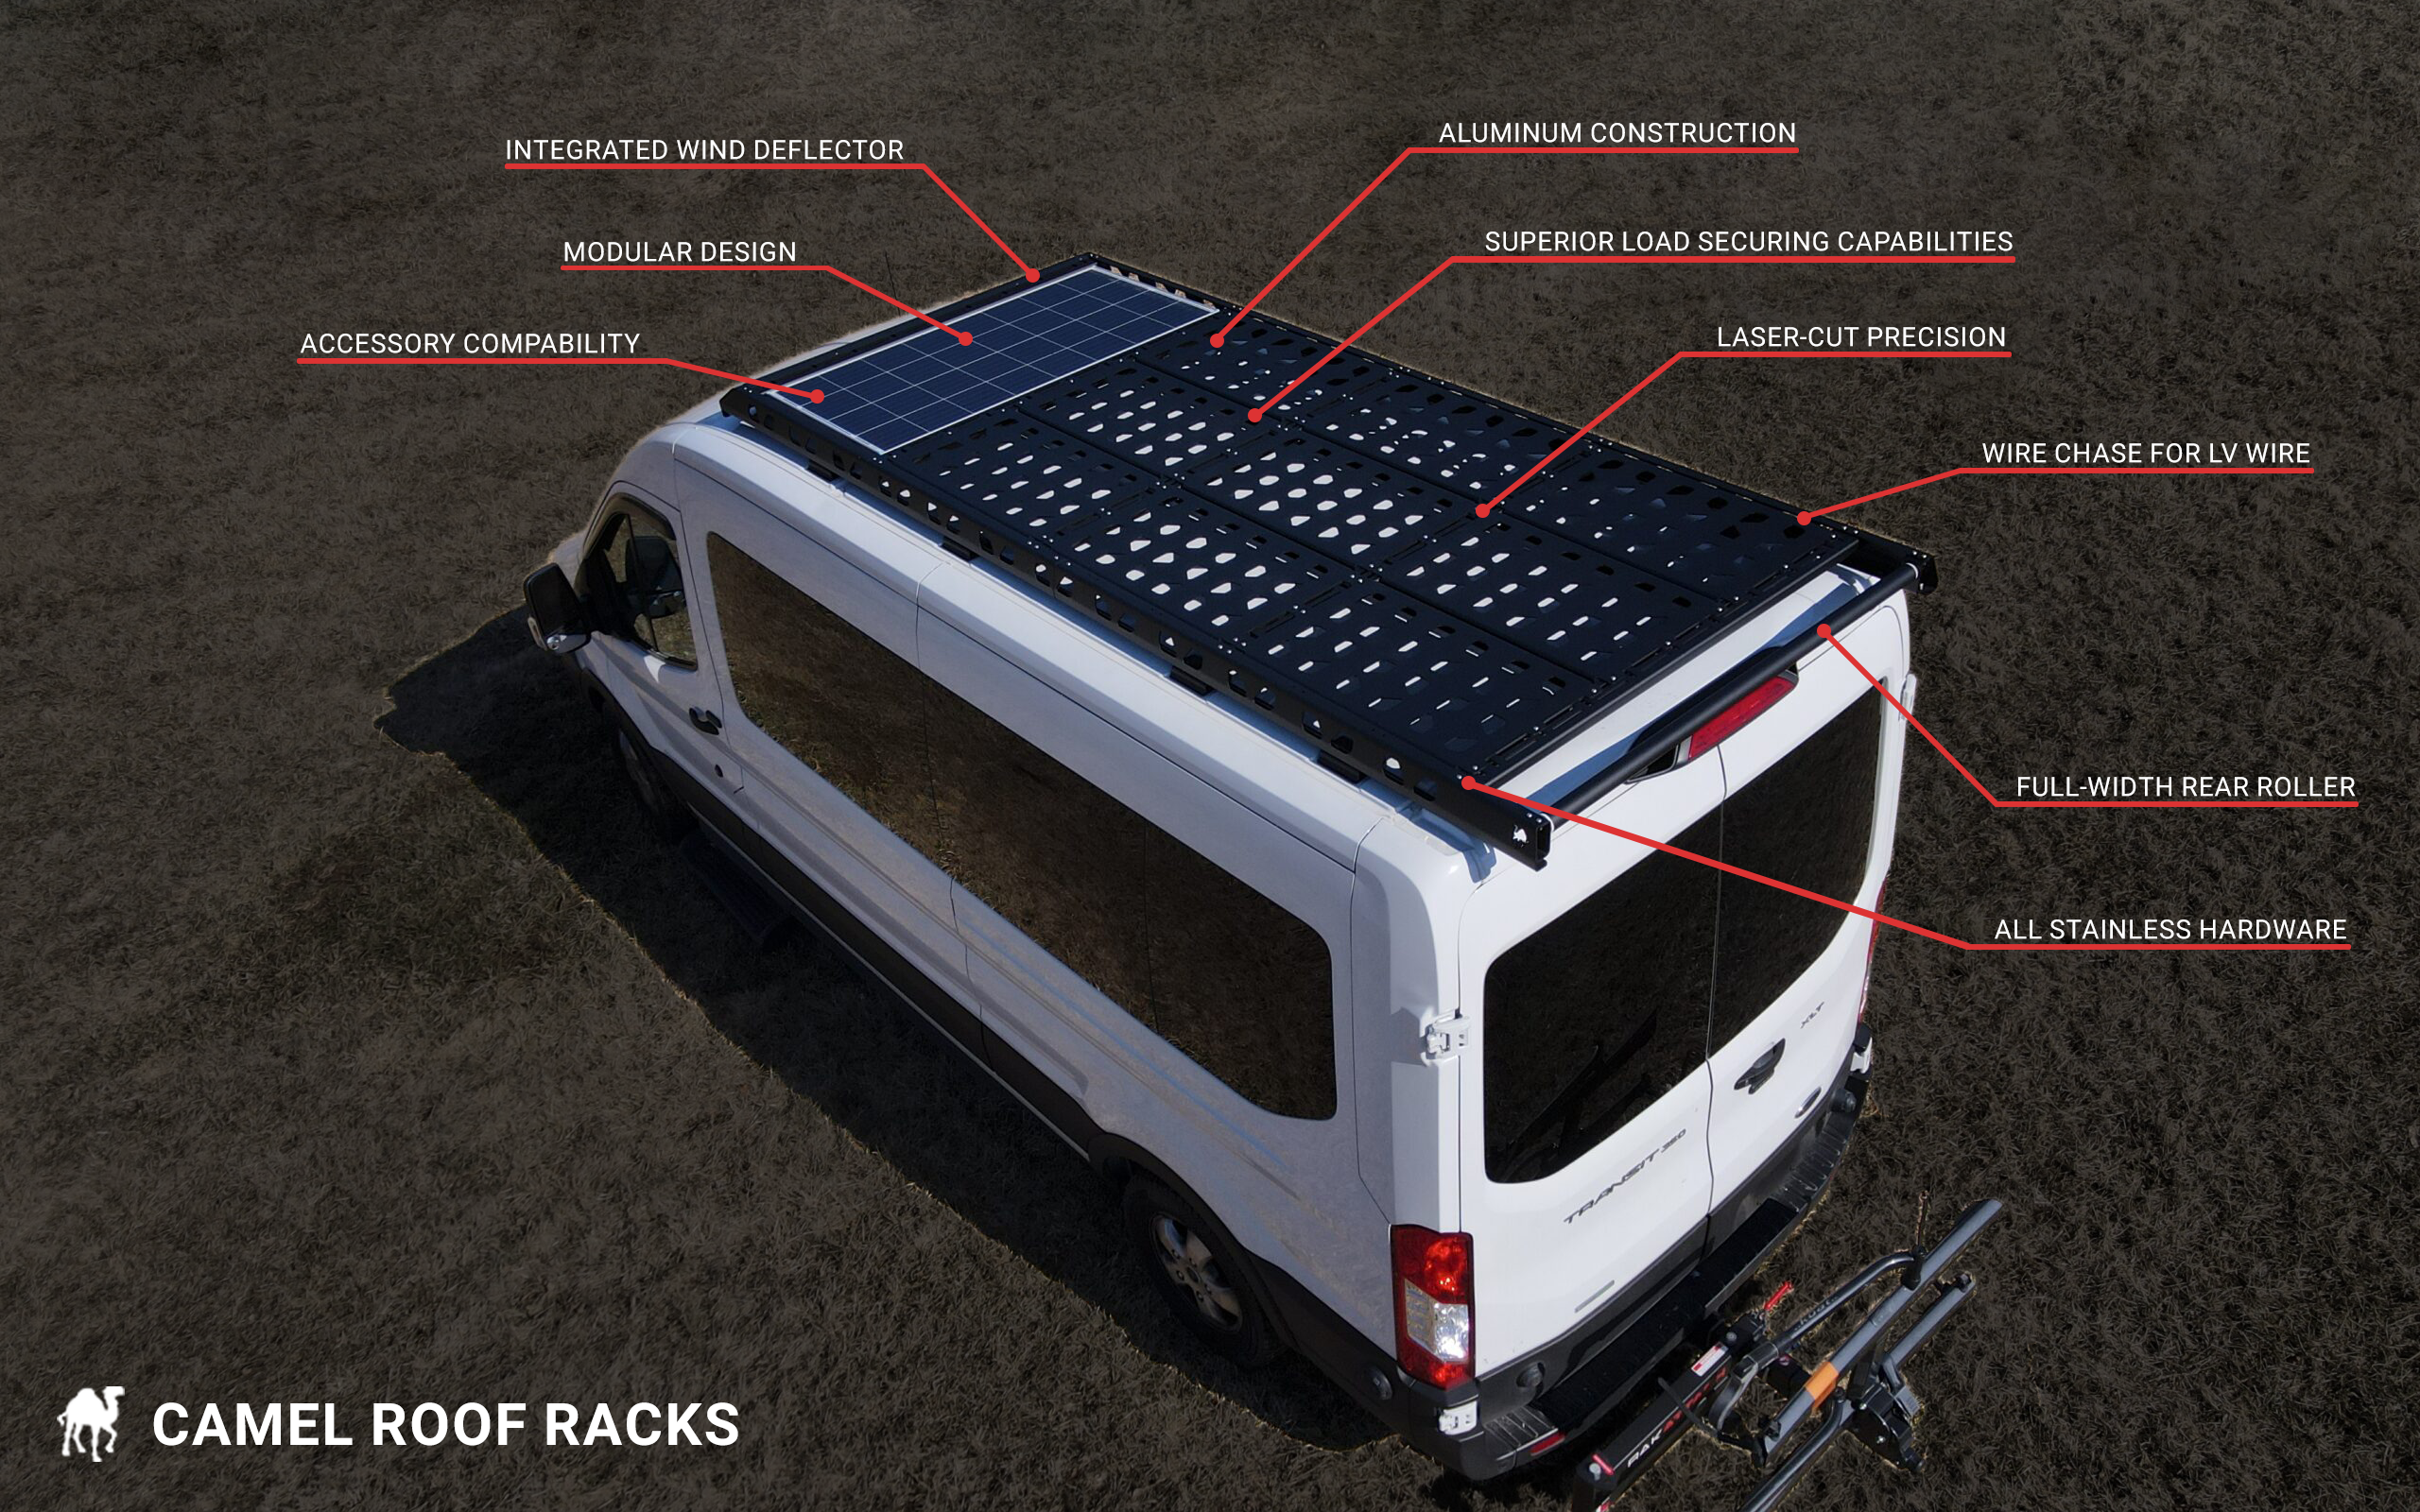 A Graphic Showing a list of the features integrated into all of our roof racks. These features are: Integrated Wind Deflector, Modular Design, Accessory Compatibility, Aluminum Construction, Superior Load Securing Capabilities, Laser-cut Precision, a Wire chase for low-voltage wire, Full-width rear roller, and all stainless hardware